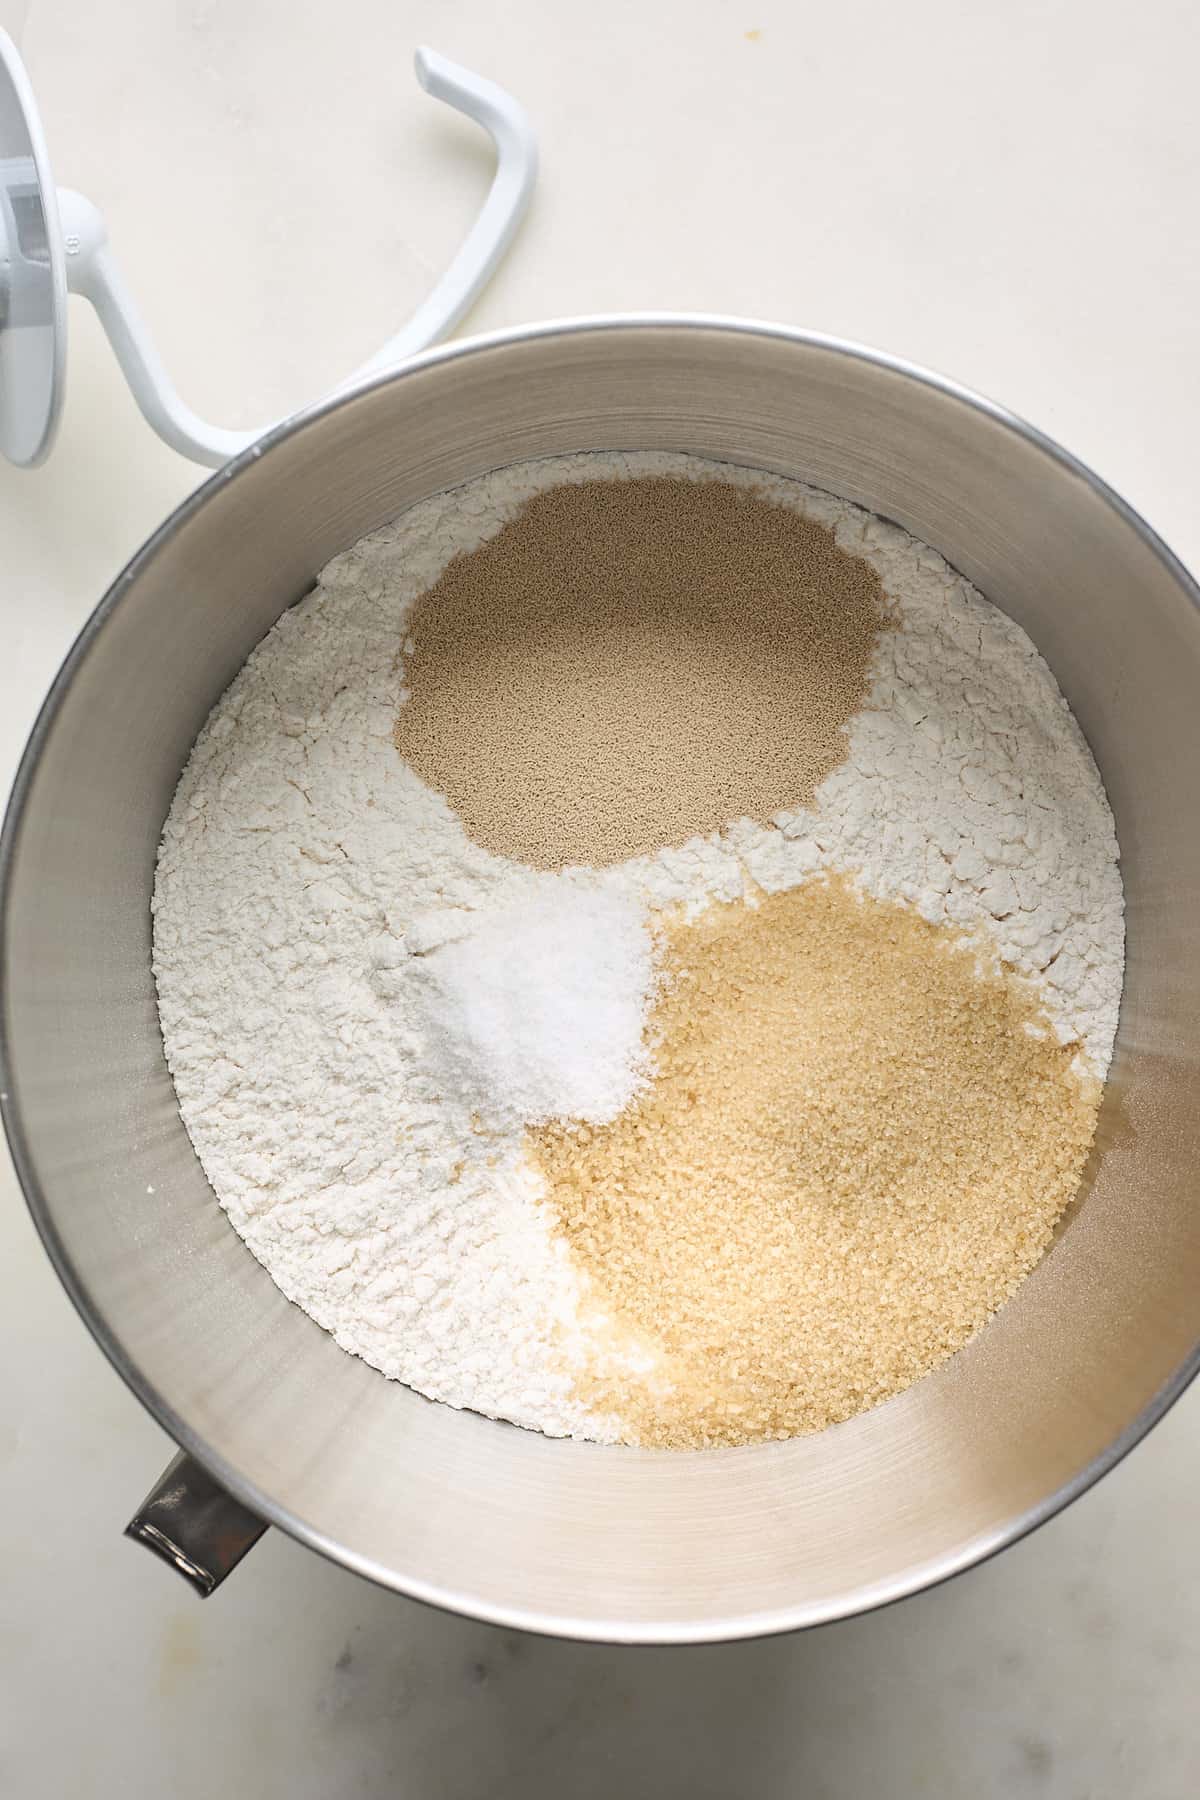 Flour, yeast and other dry ingredients in a mixing bowl